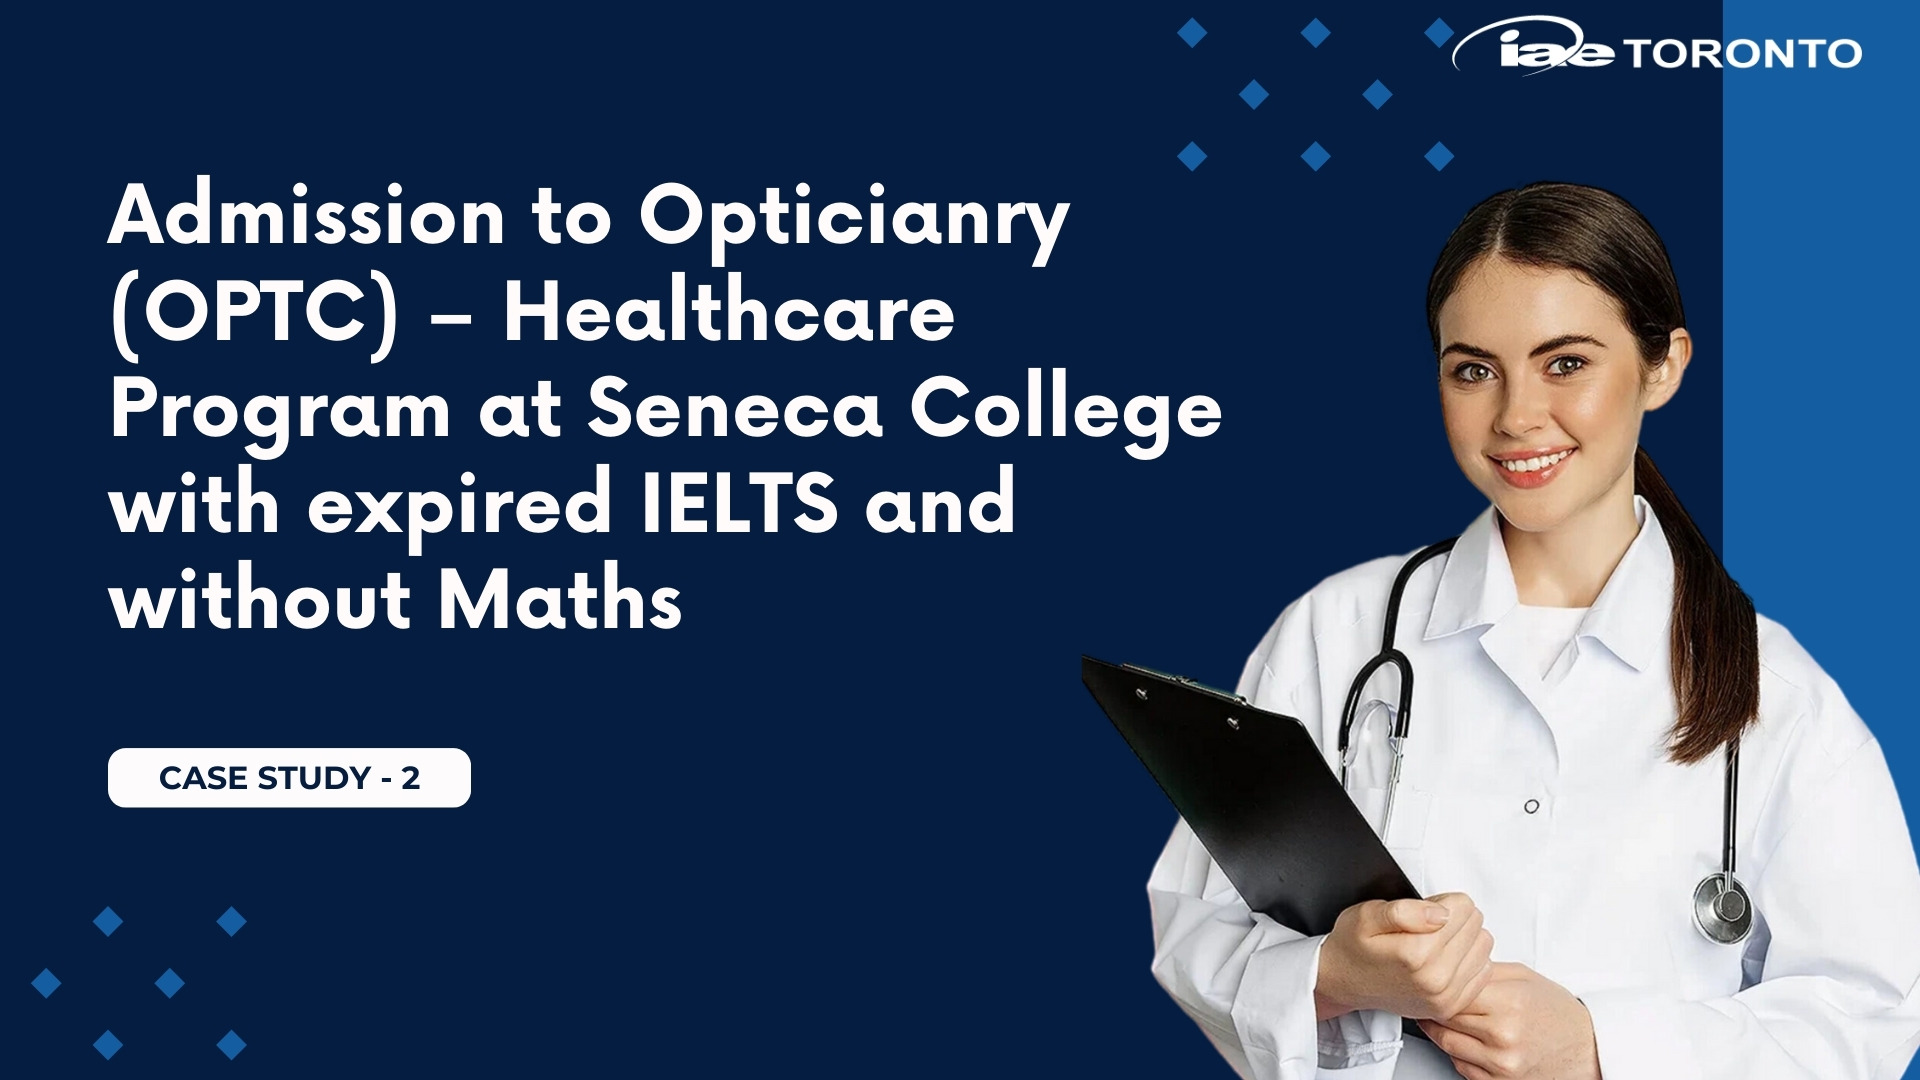 Admission to Opticianry (OPTC) – Healthcare Program at Seneca College with expired IELTS and without Maths